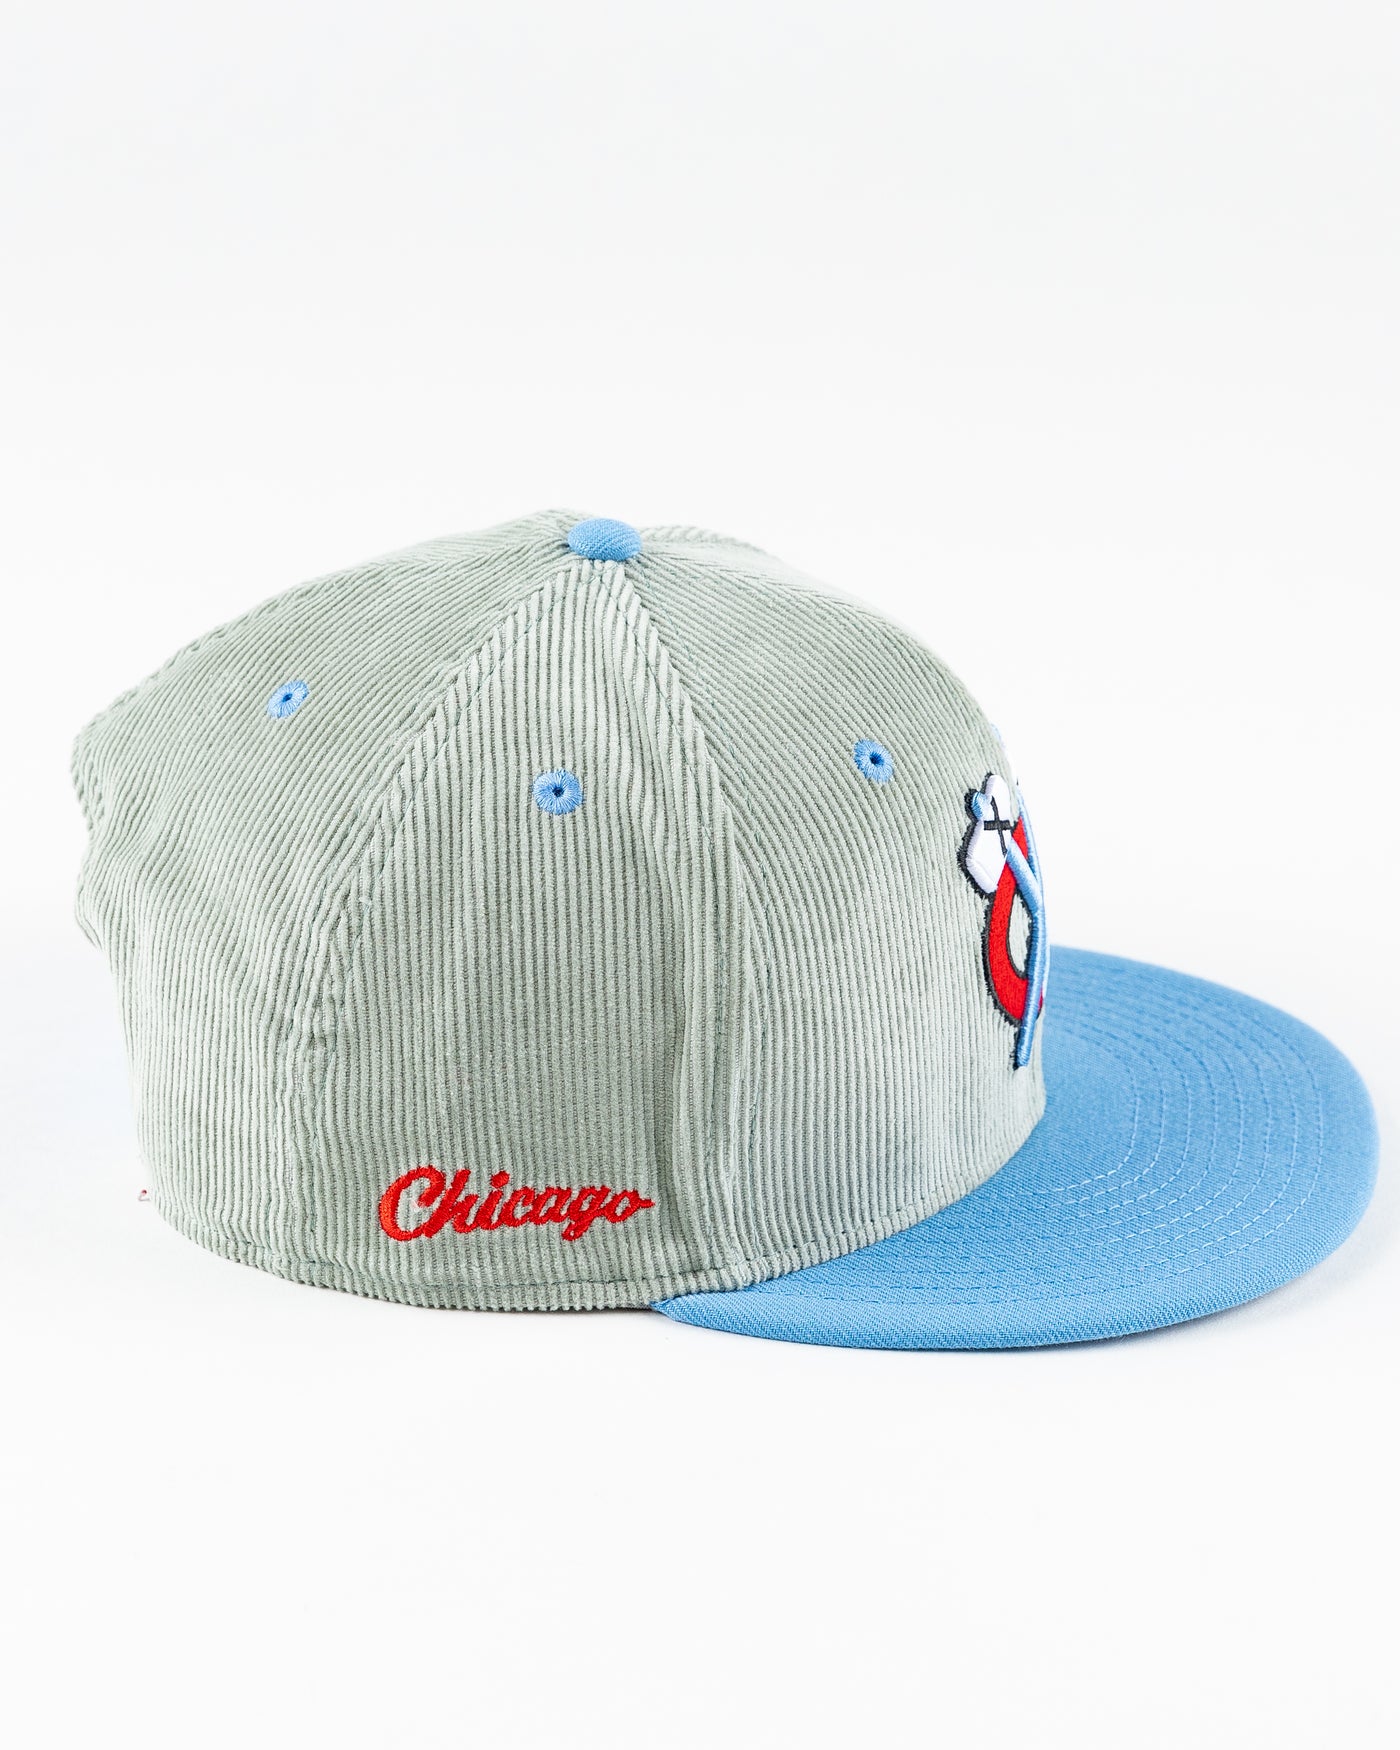 grey corduroy and blue flat brim New Era snapback with Chicago Blackhawks secondary logo embroidered on front - right side lay flat